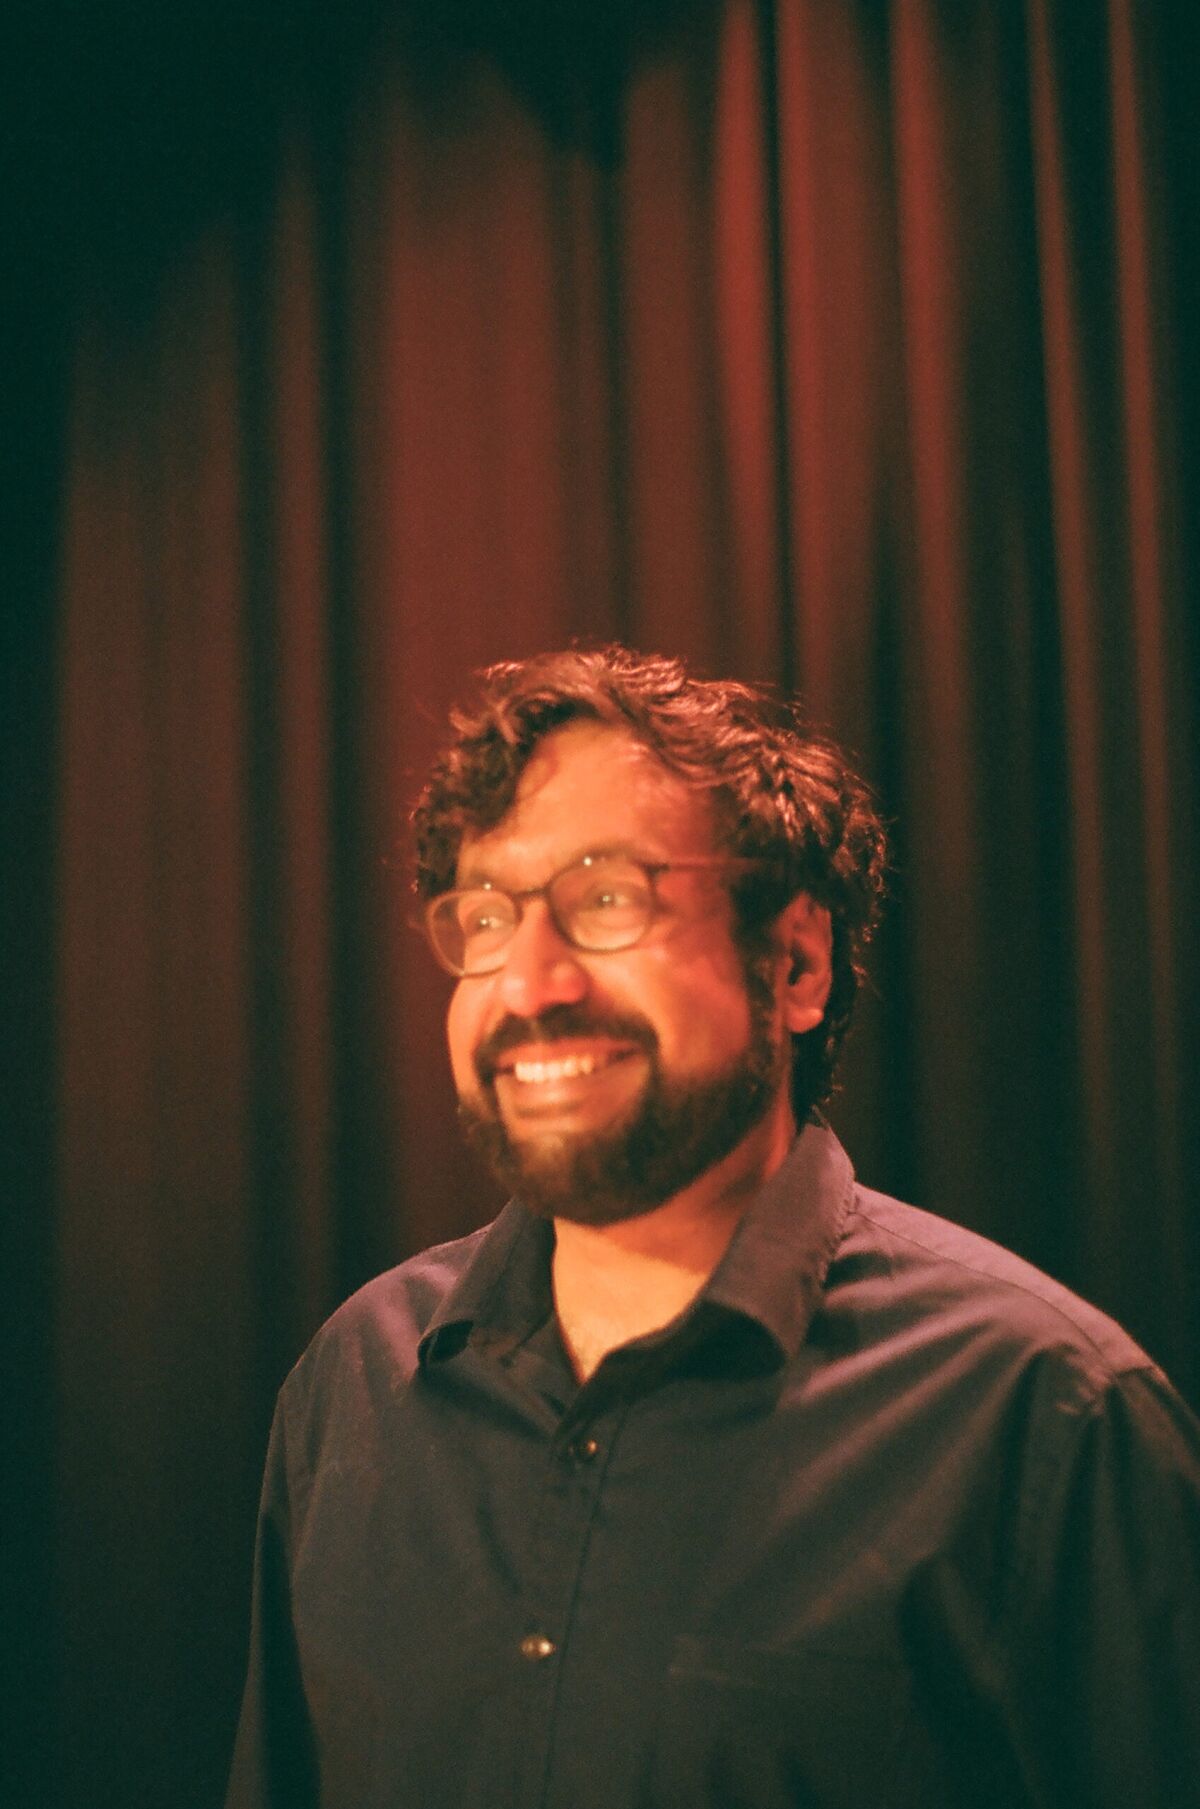 Hari Kondabolu in a black shirt and glasses smiling in front of a red curtain